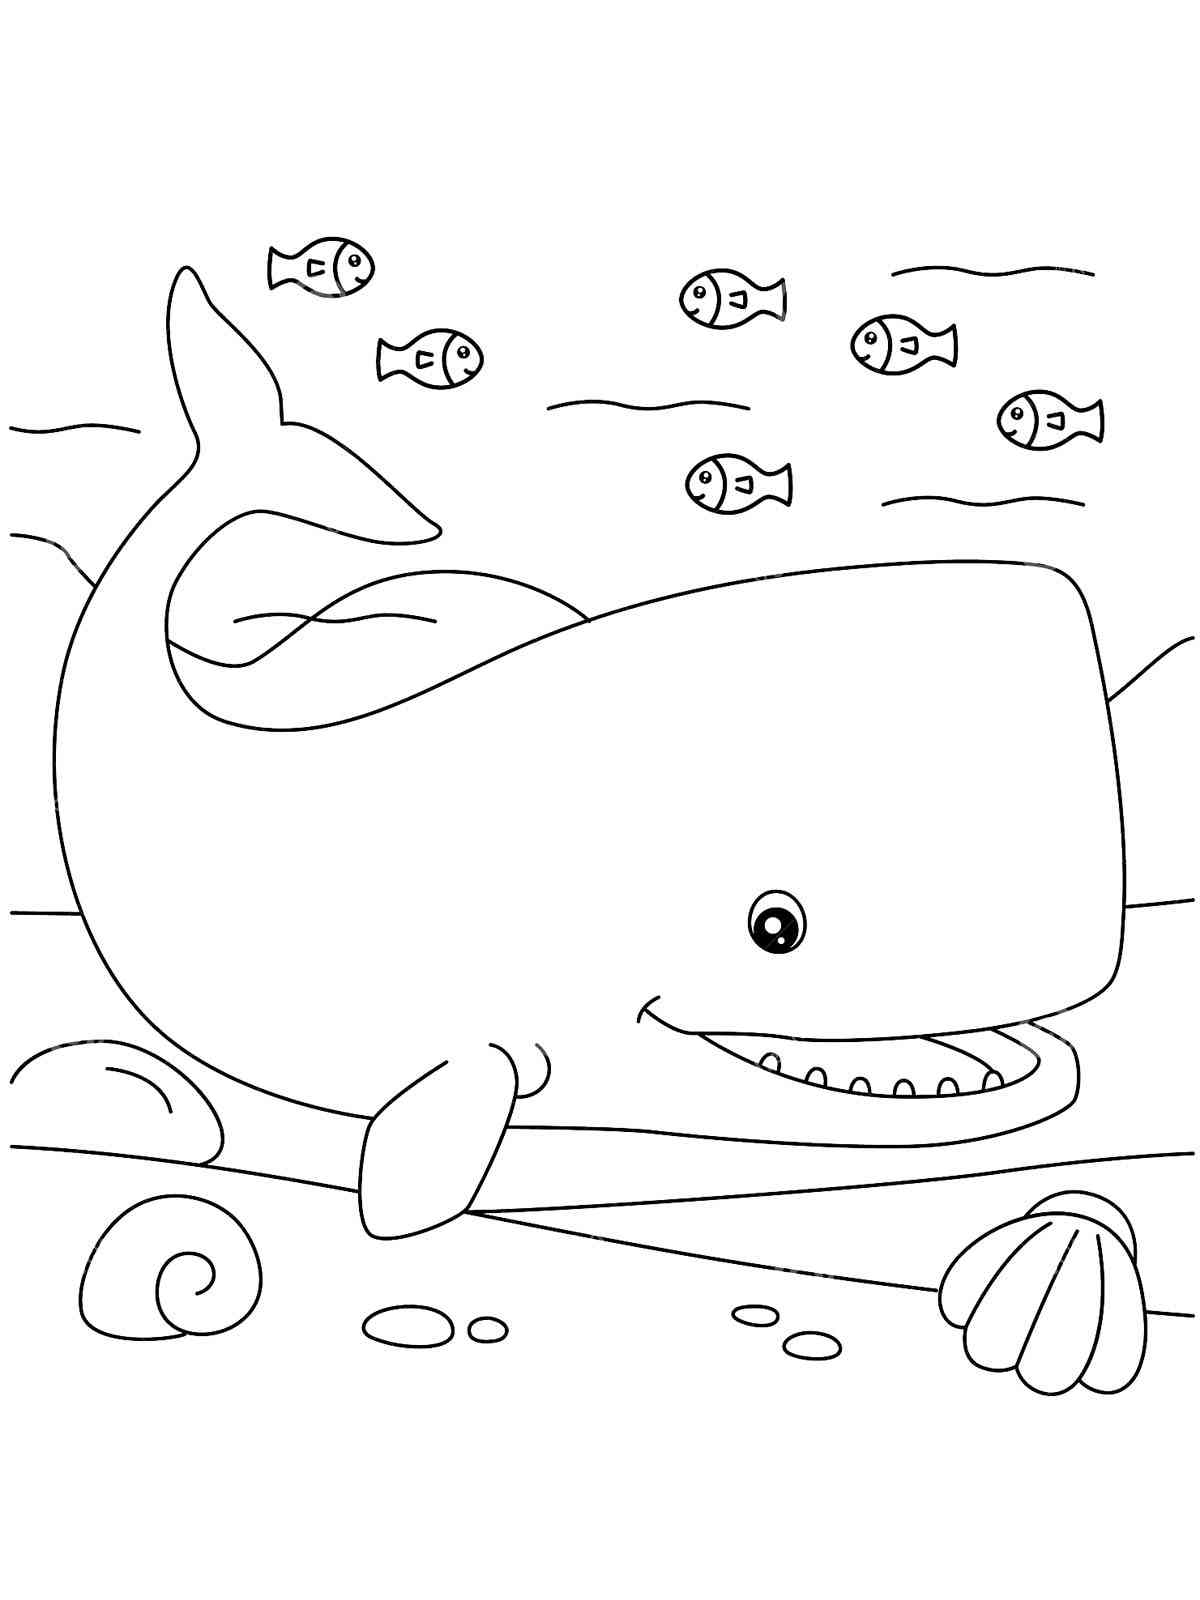 Cachalot 16 coloring page